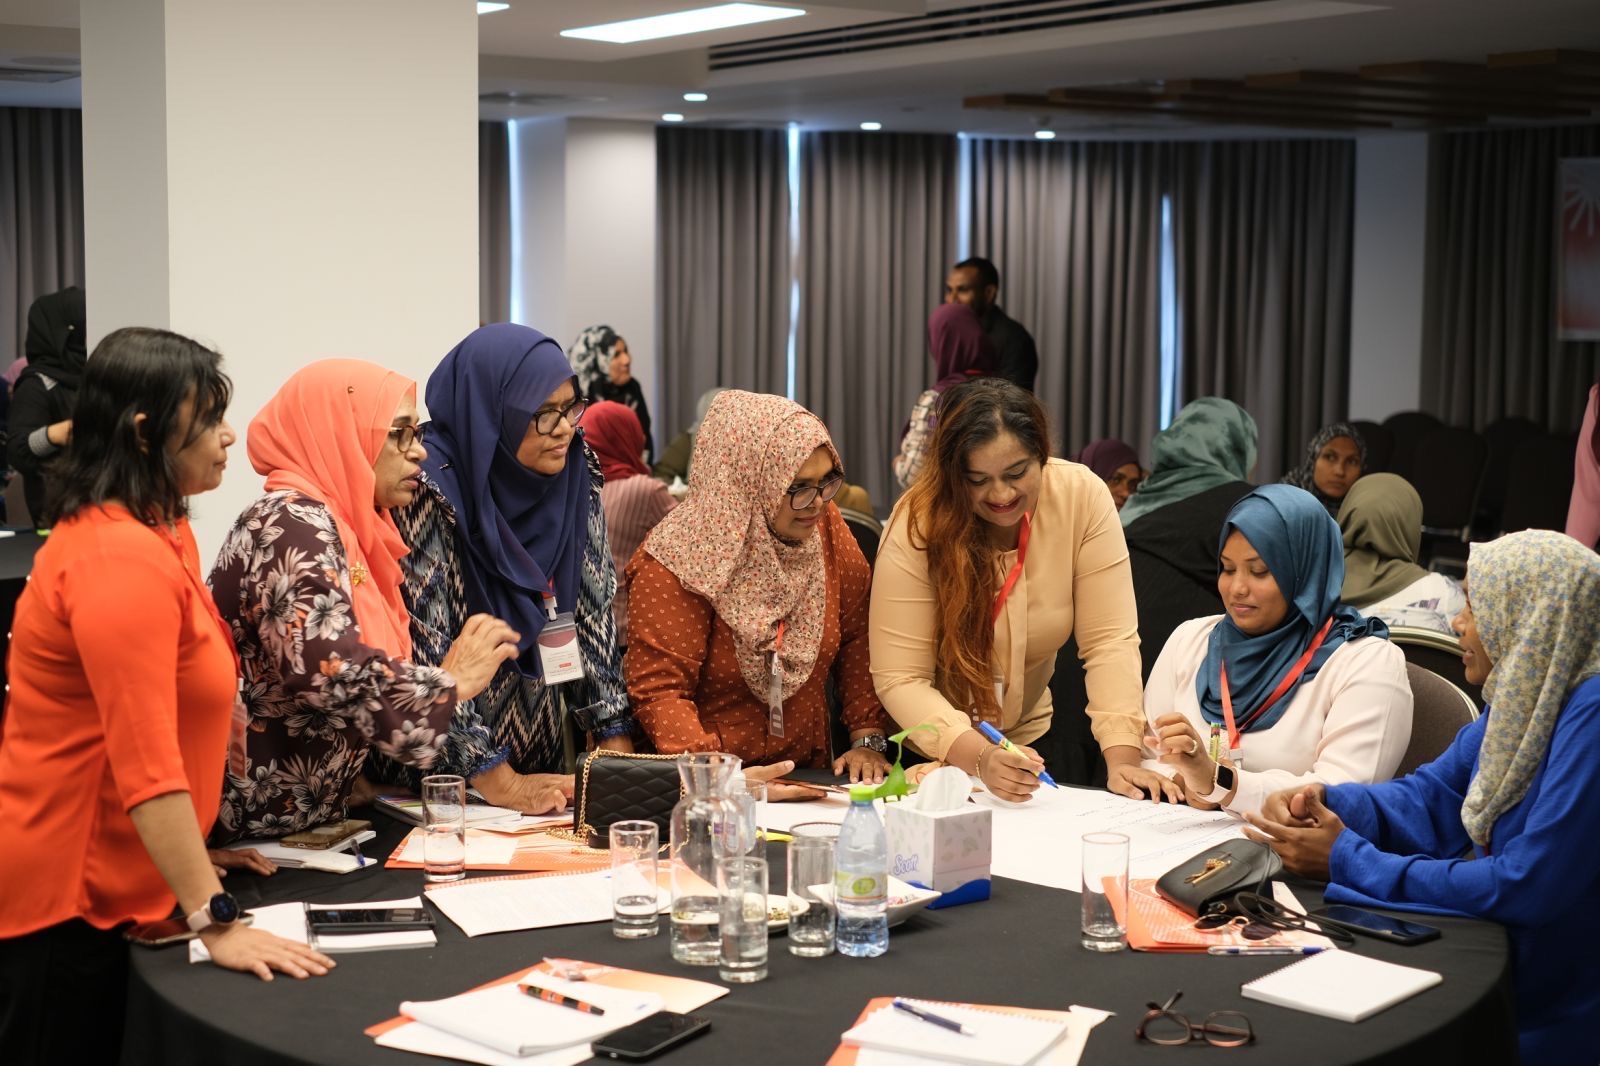 Practice Parliament for Women participants around a table